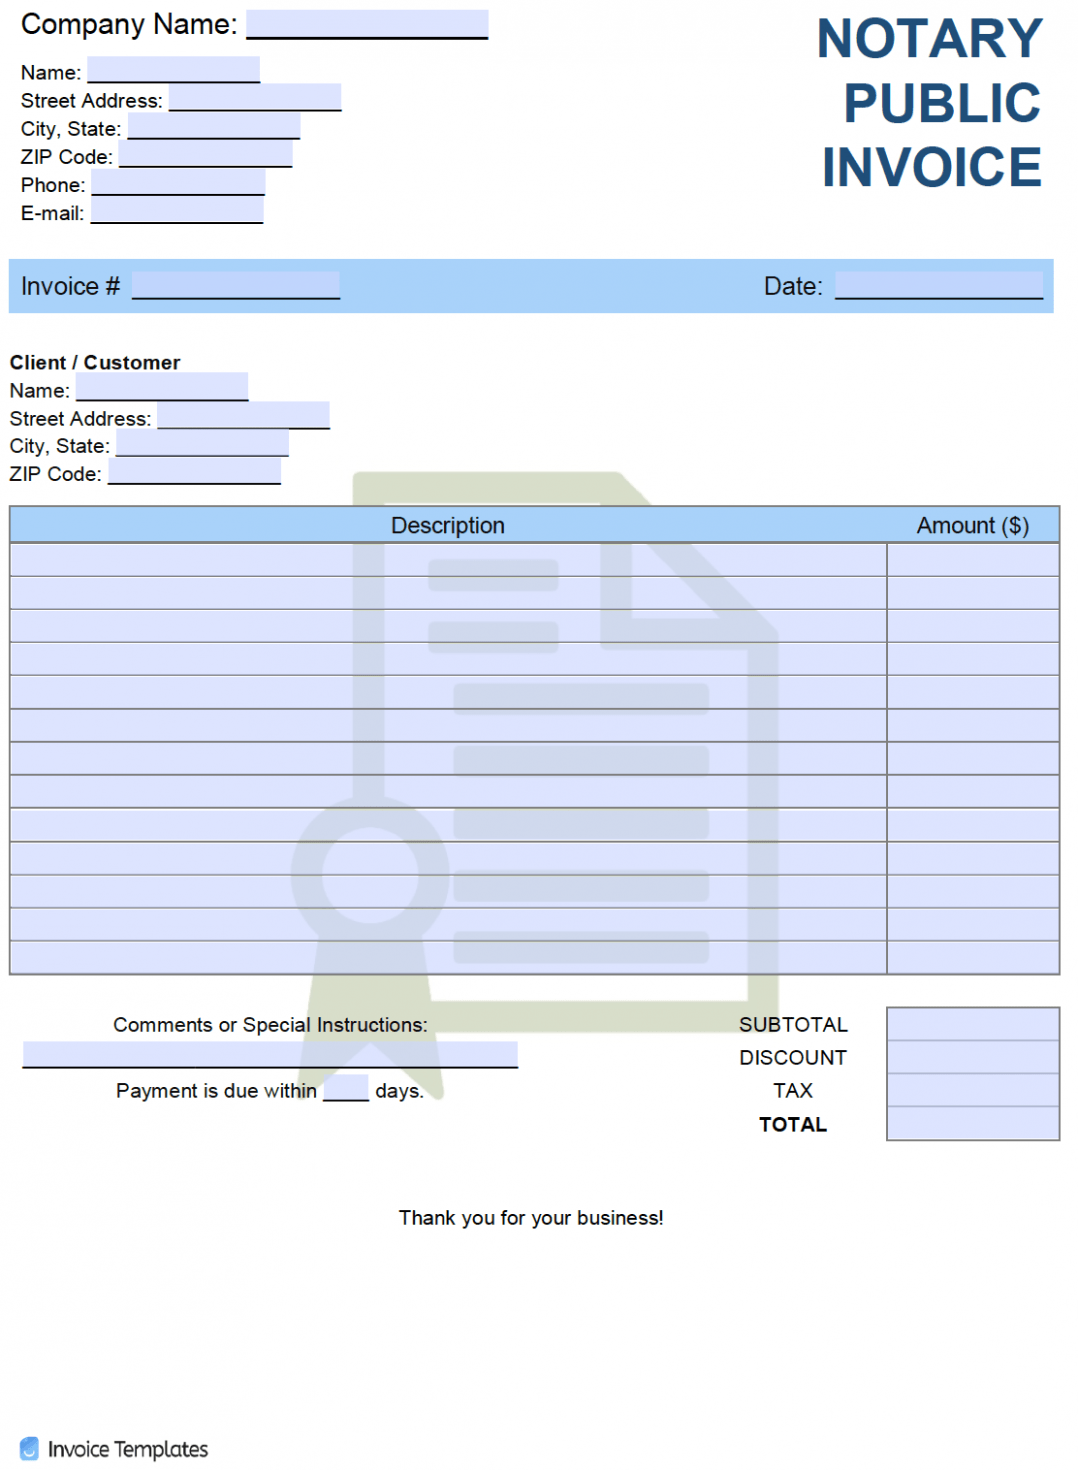 Printable Notary Invoice Template Free Docs